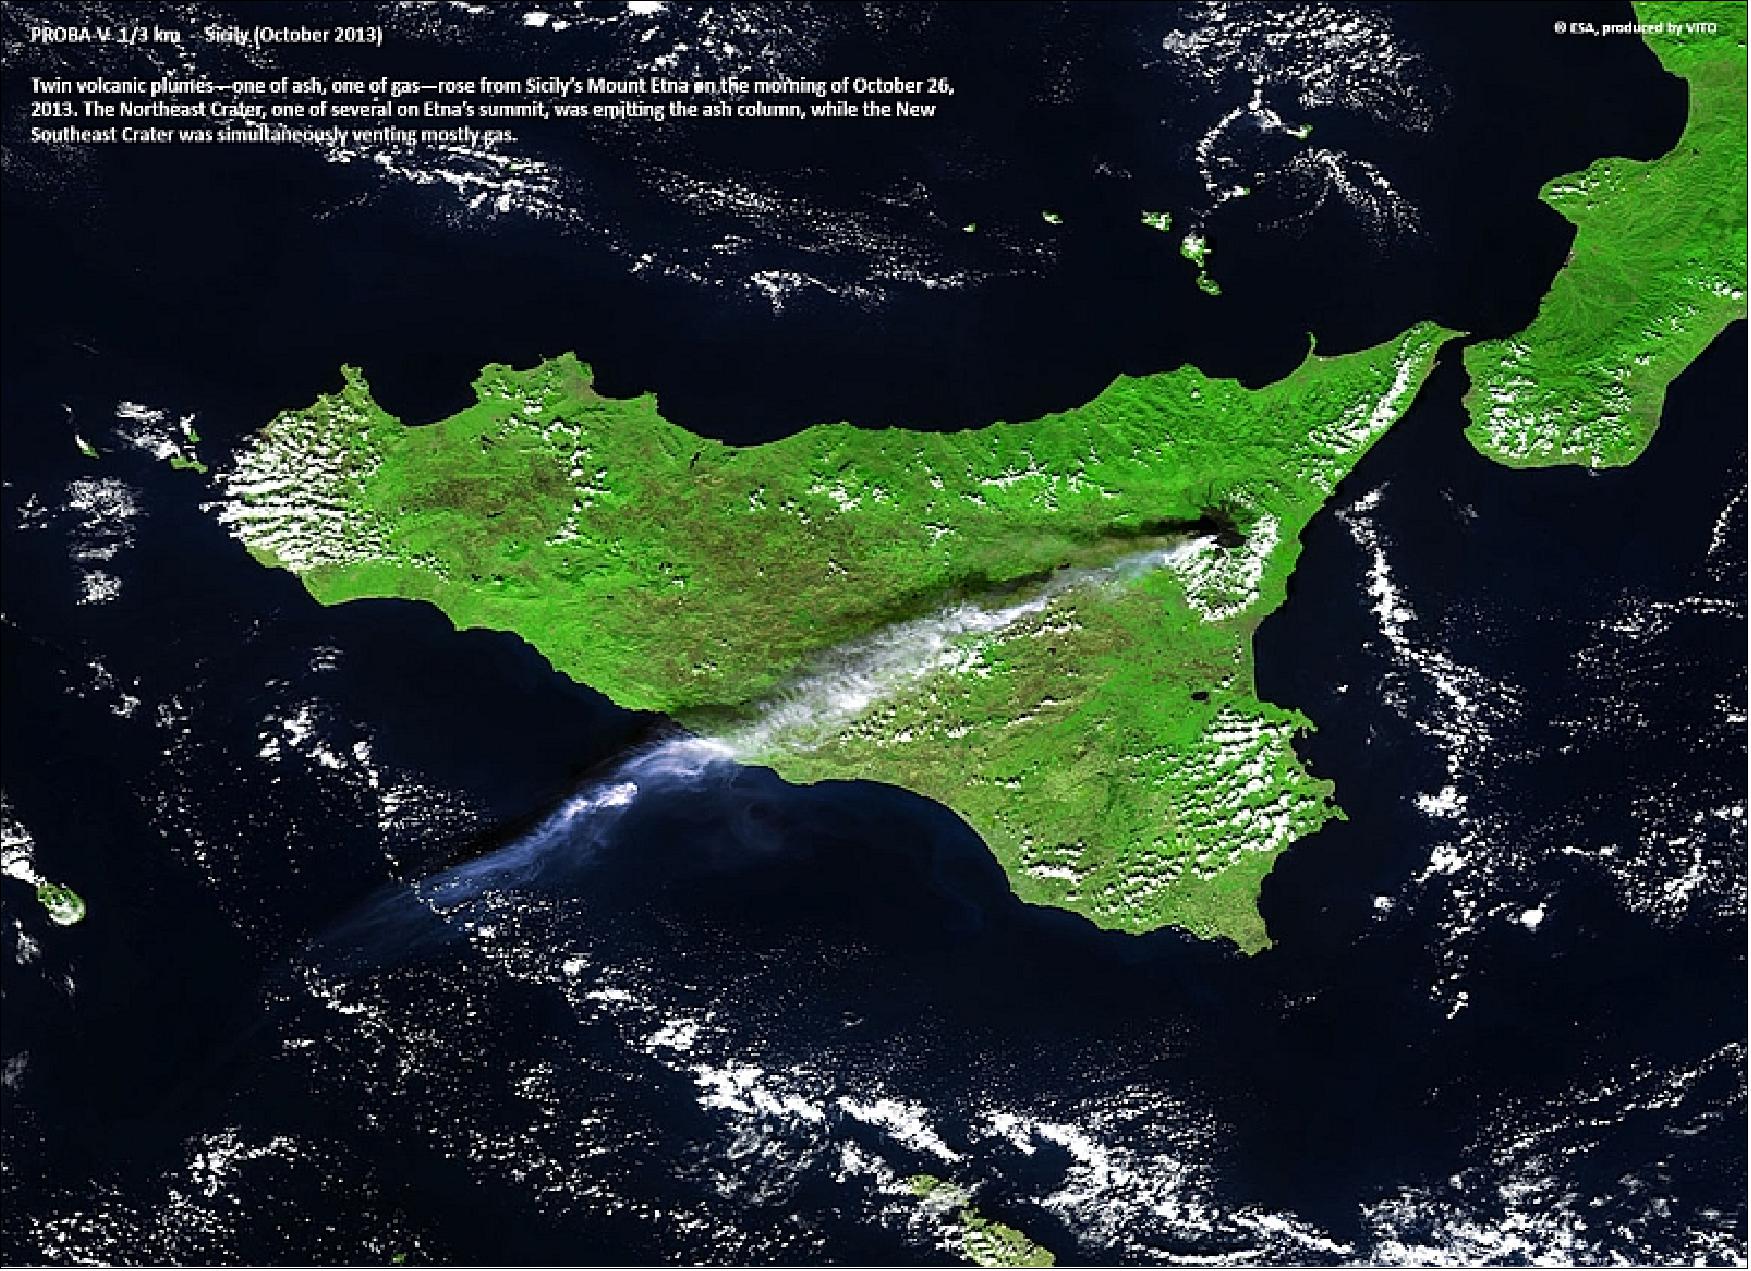 Figure 62: PROBA-V image acquired on Oct. 26, 2013, showing Sicily, Italy with the twin volcanic plumes – one ash, one gas – from Mt. Etna (image credit: ESA, BELSPO)